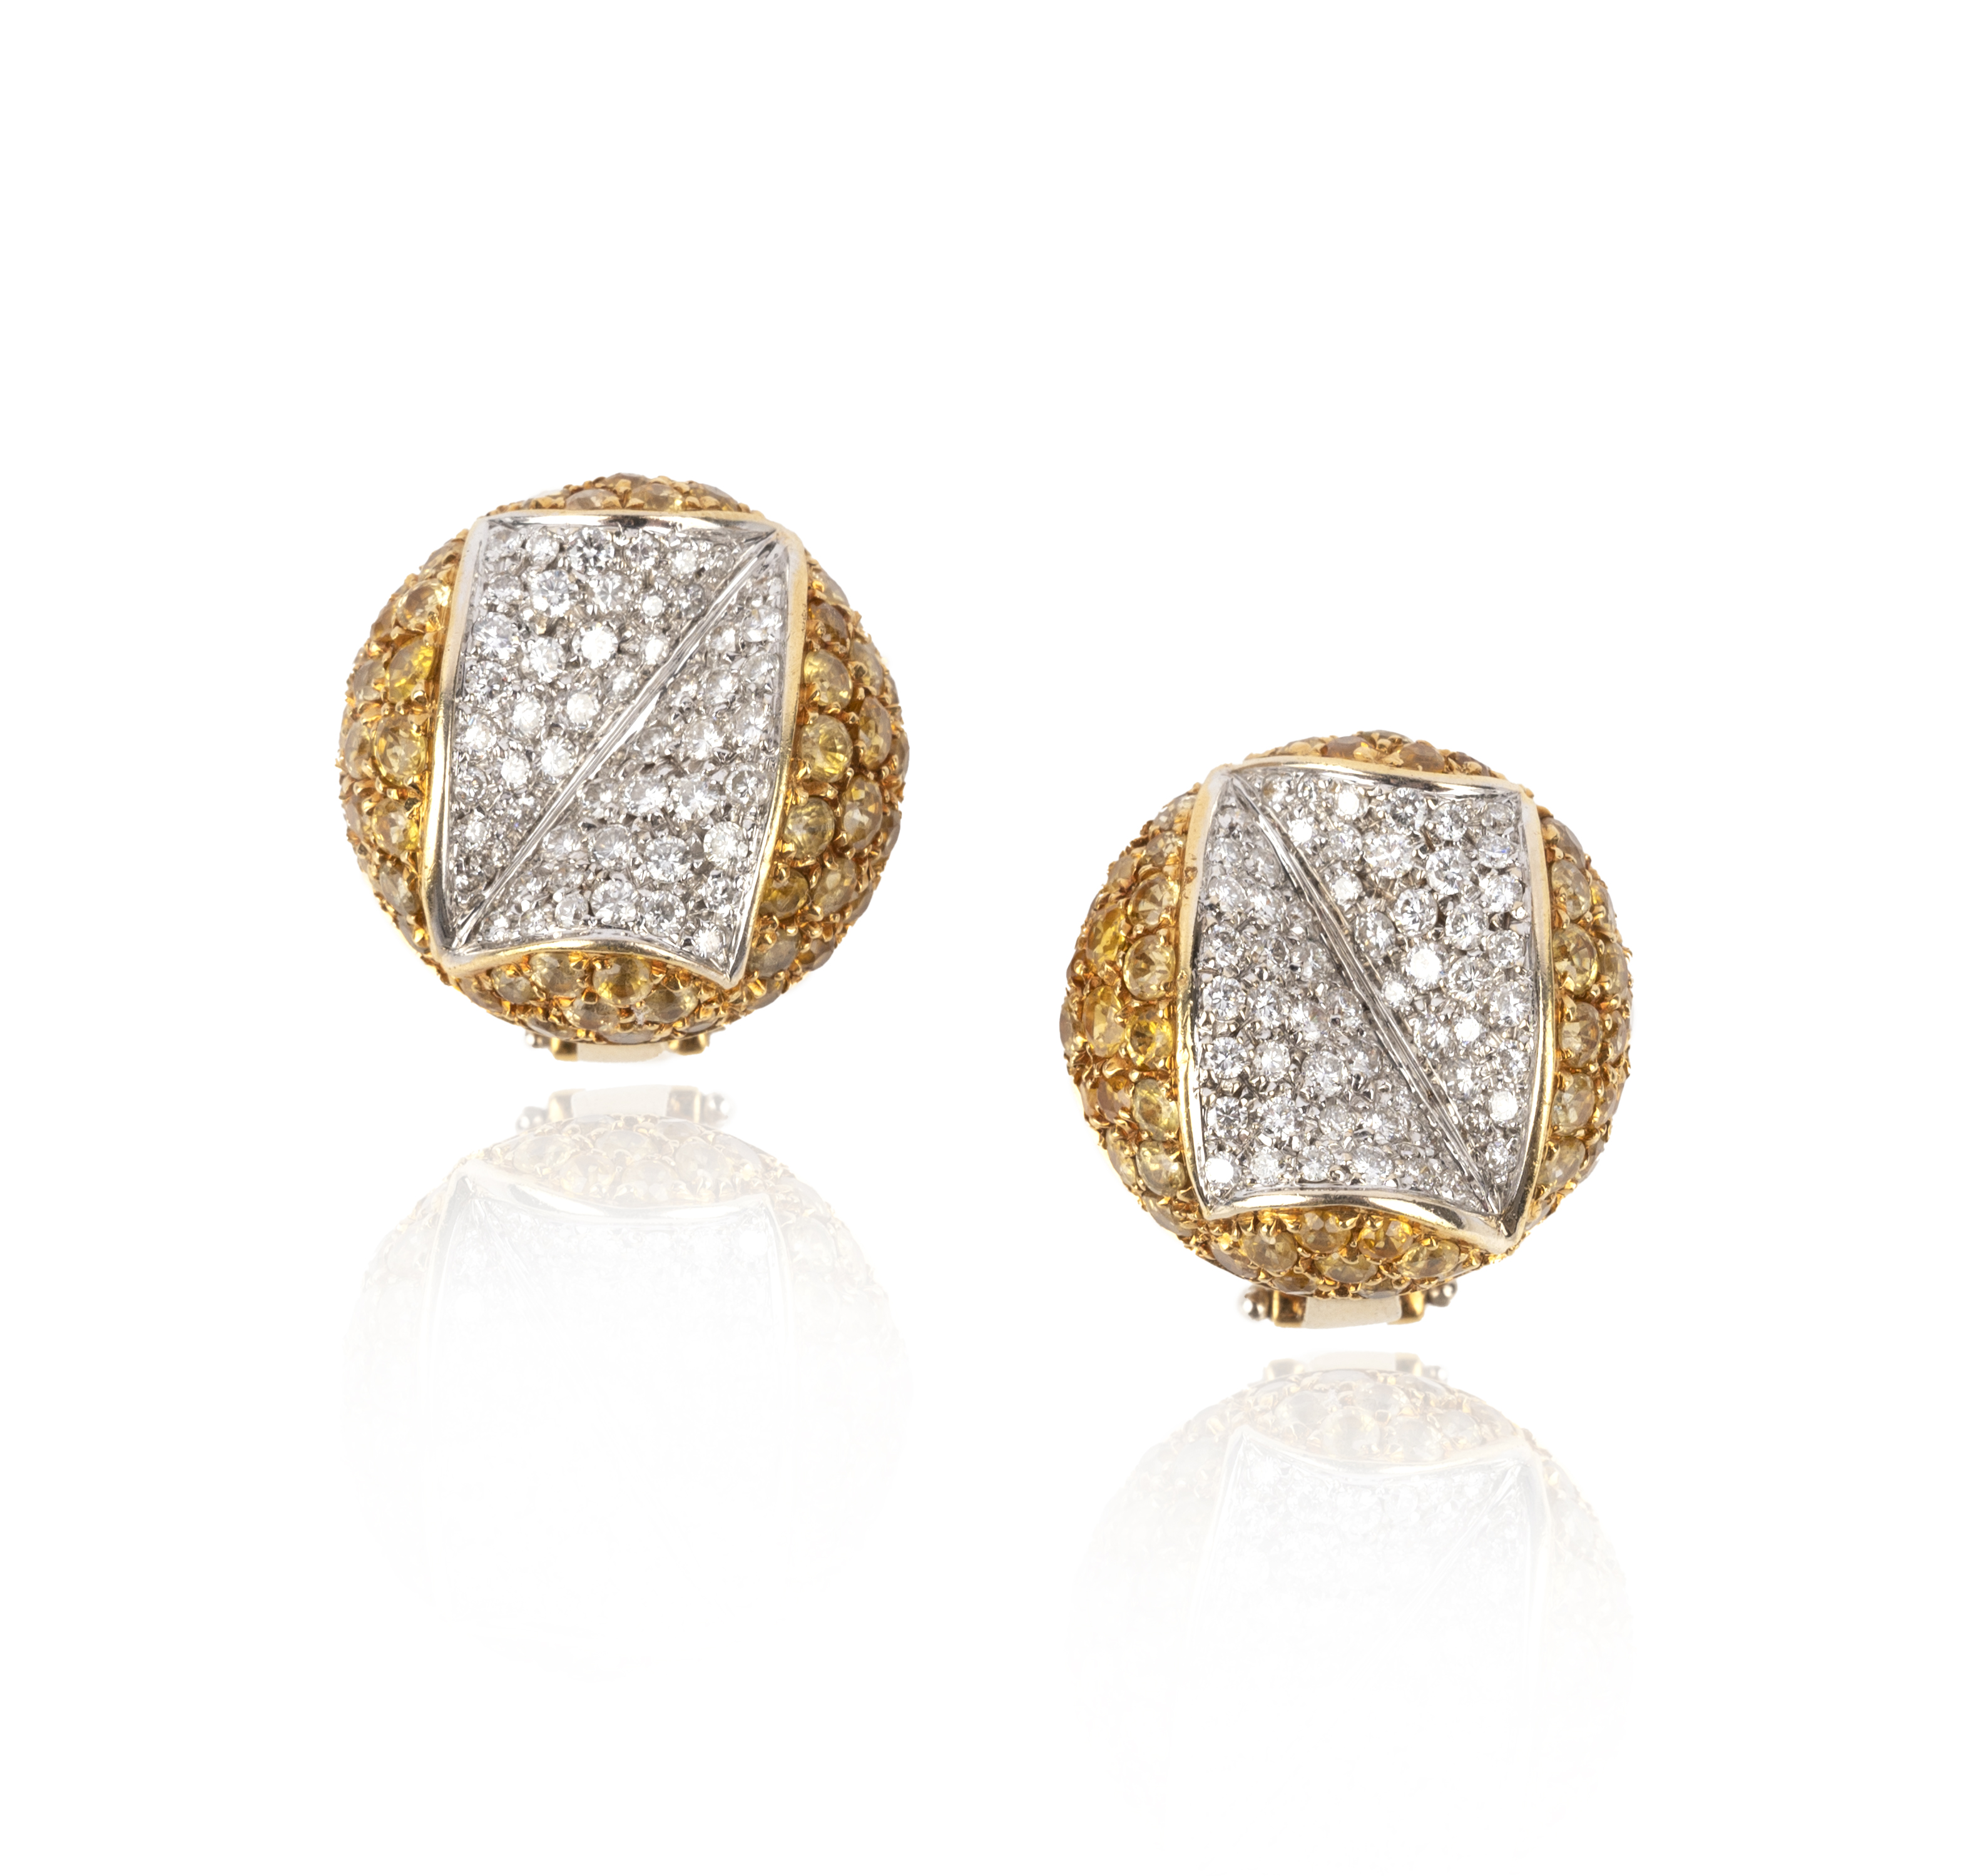 A pair of yellow sapphire and diamond bombe earrings, set with a central panel of circular-cut